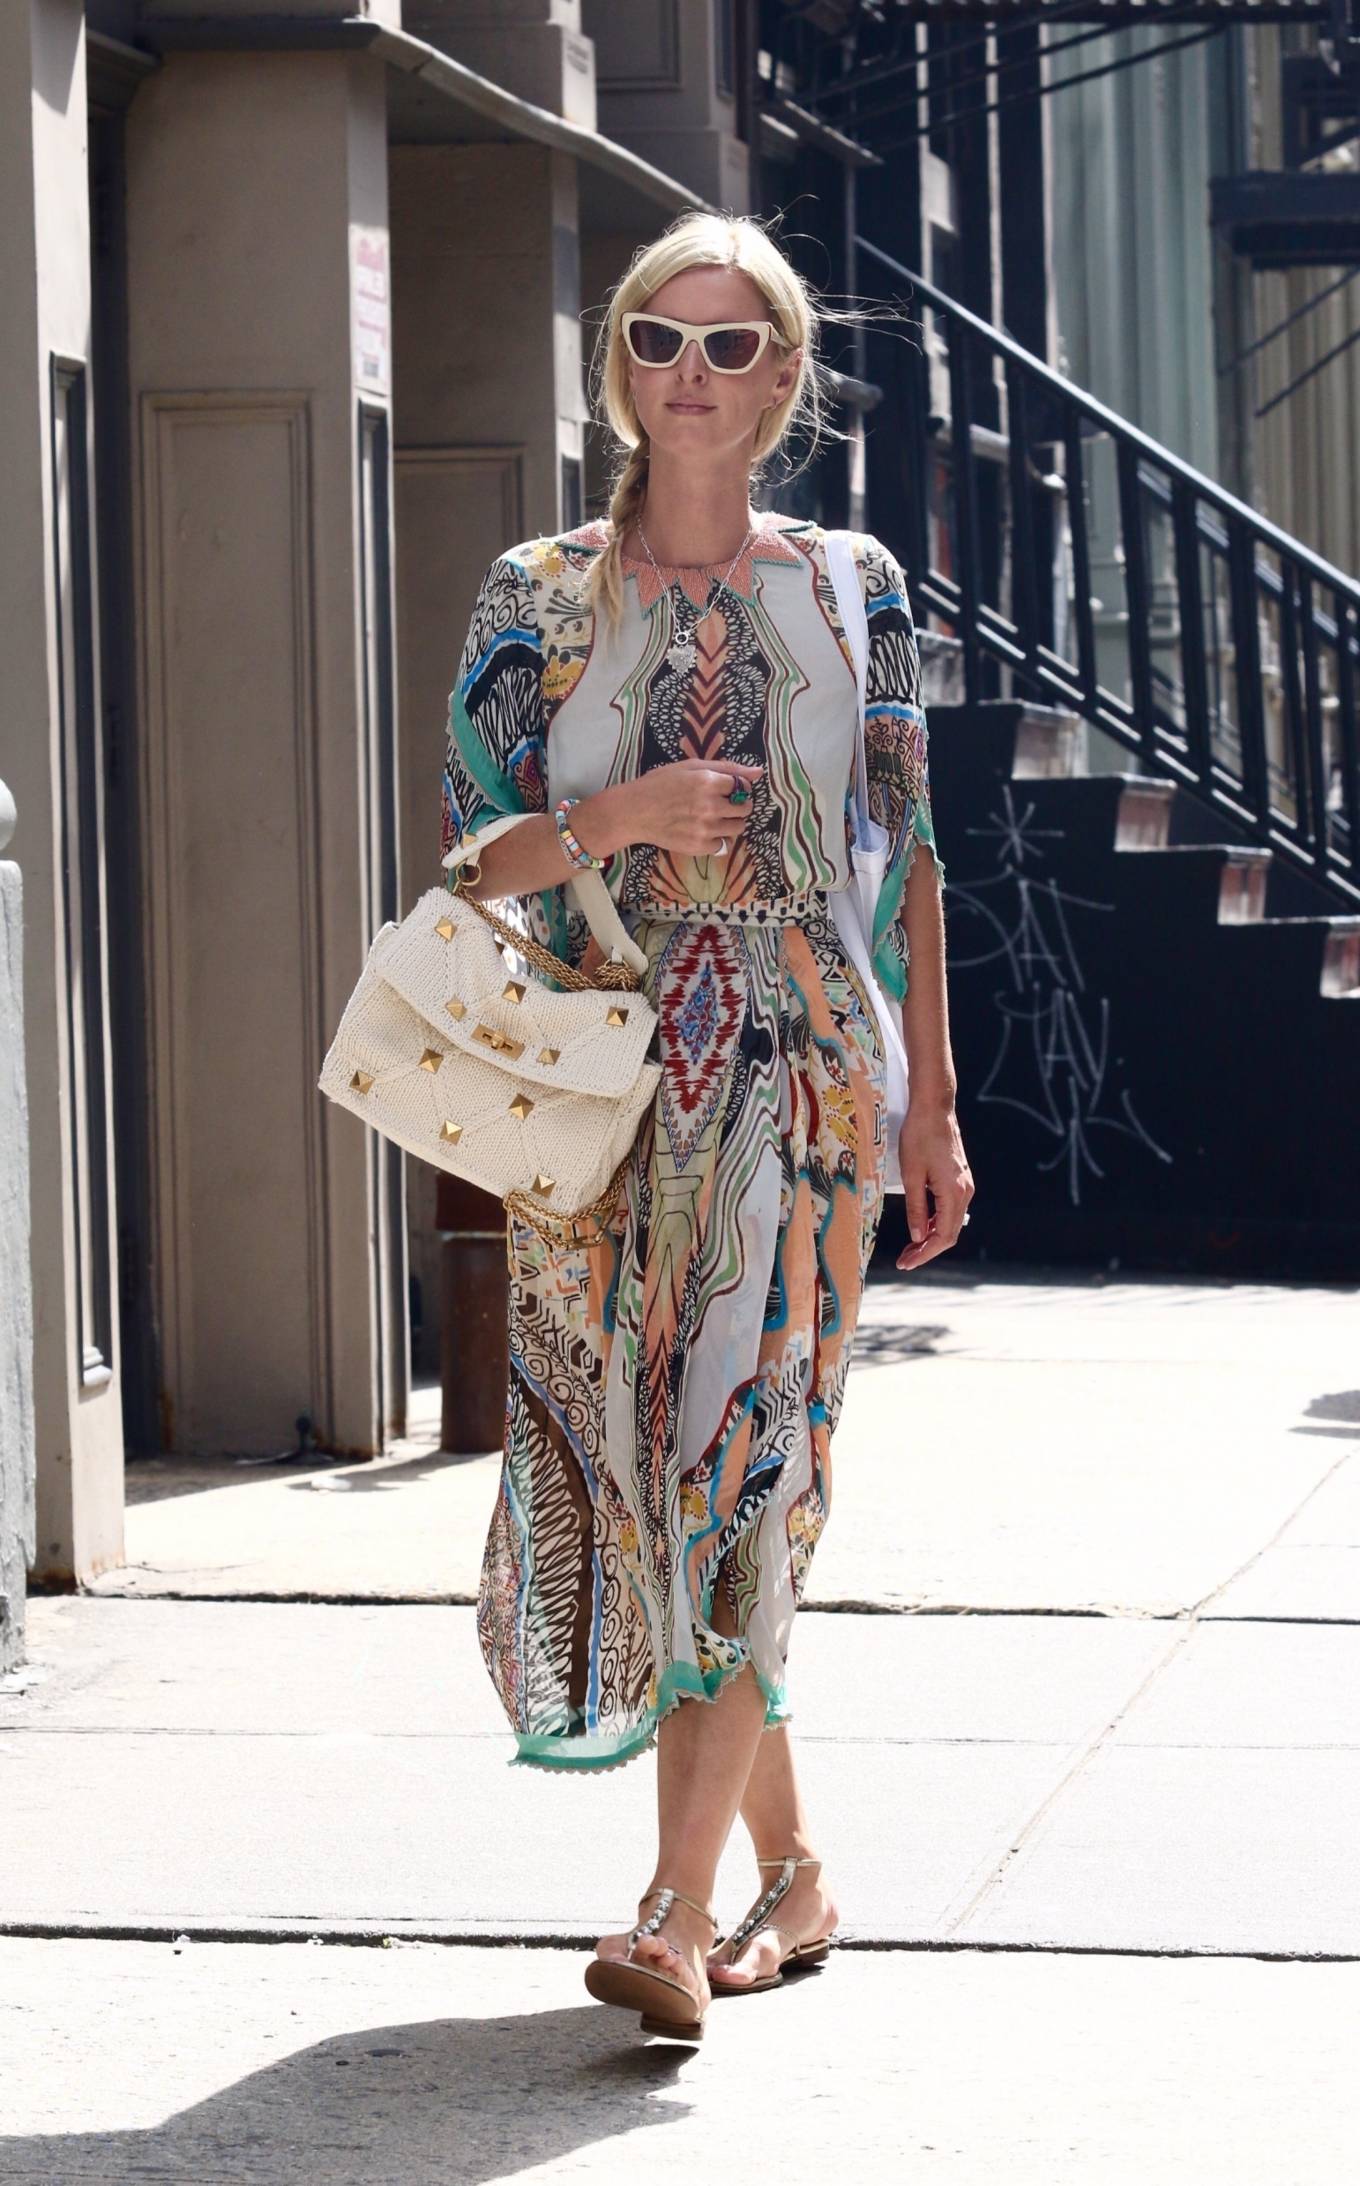 Nicky Hilton 2021 : Nicky Hilton – In a colorful summery dress out on Labor Day Weekend in Manhattan’s Soho area-11